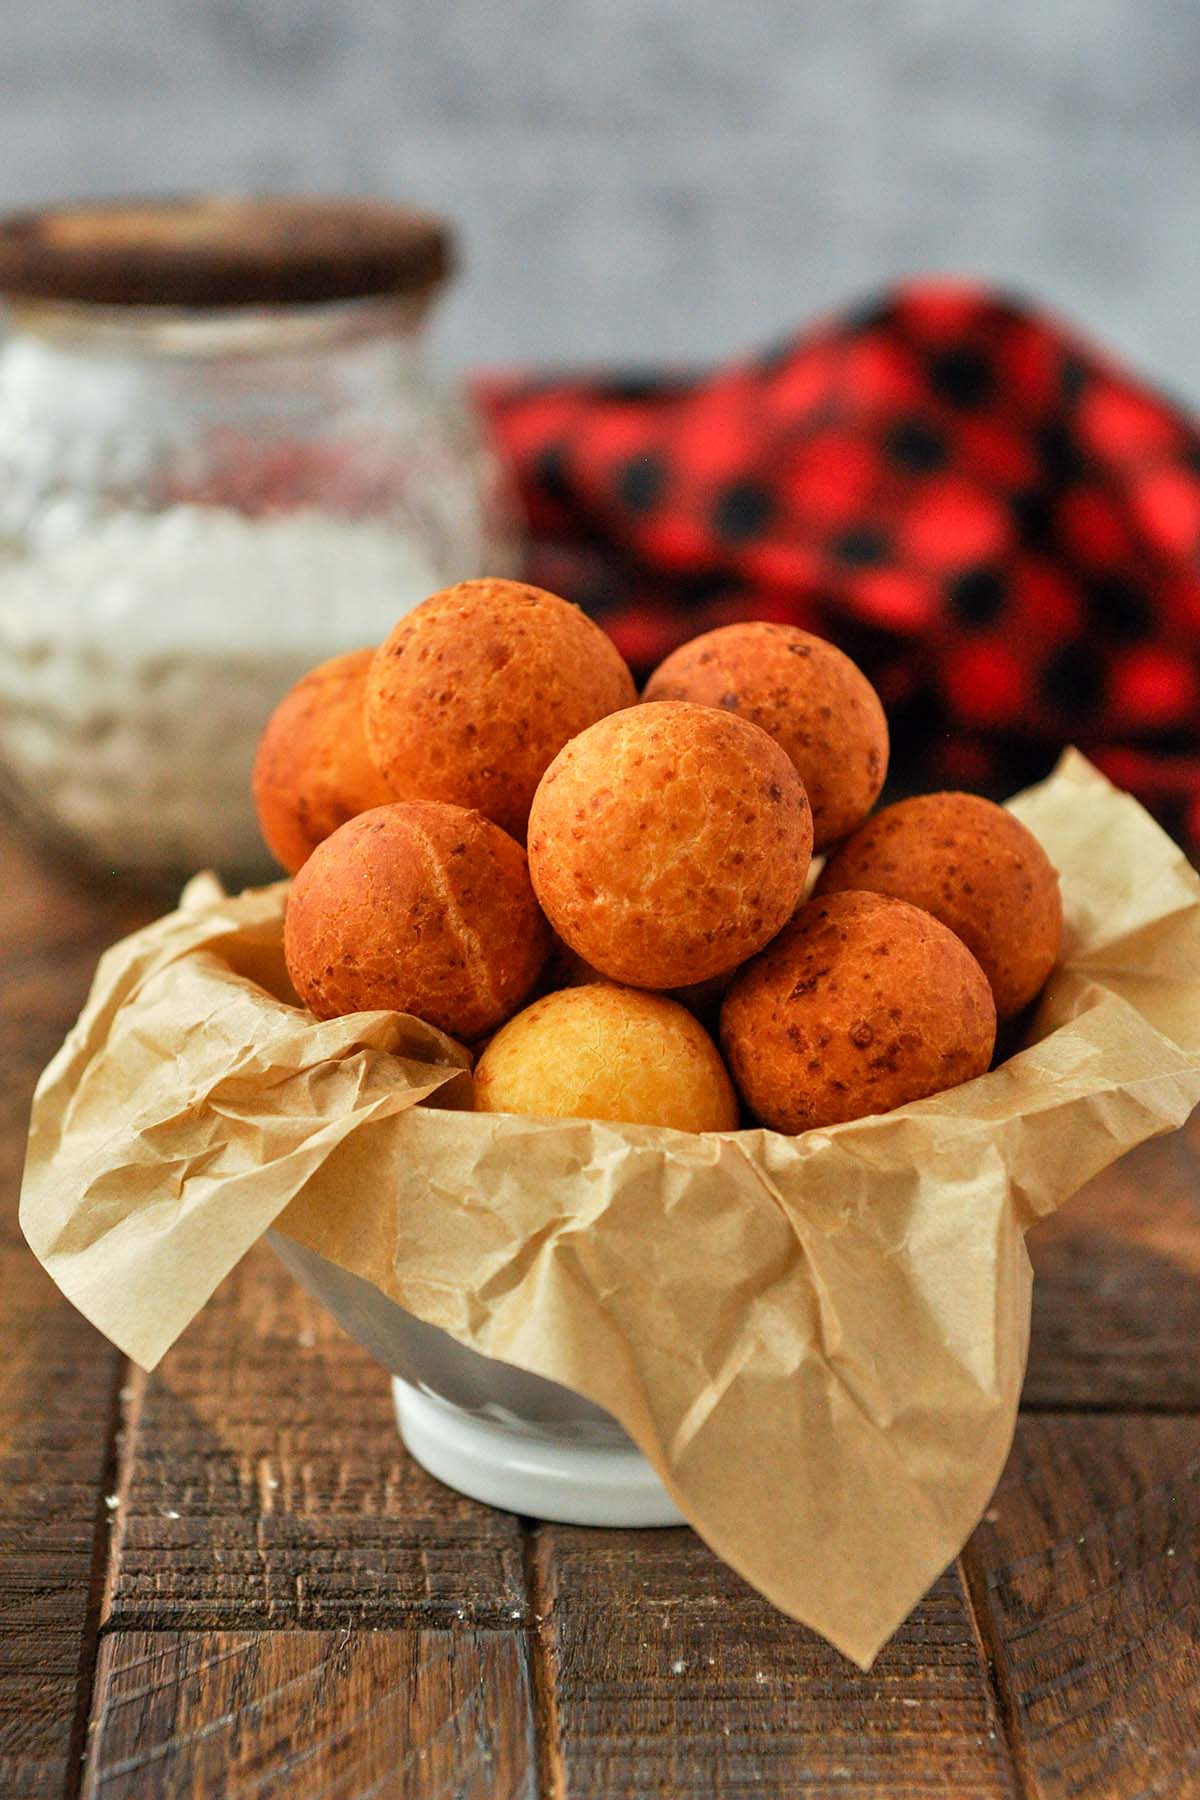 A bowl of buñuelos with a black and red towel.